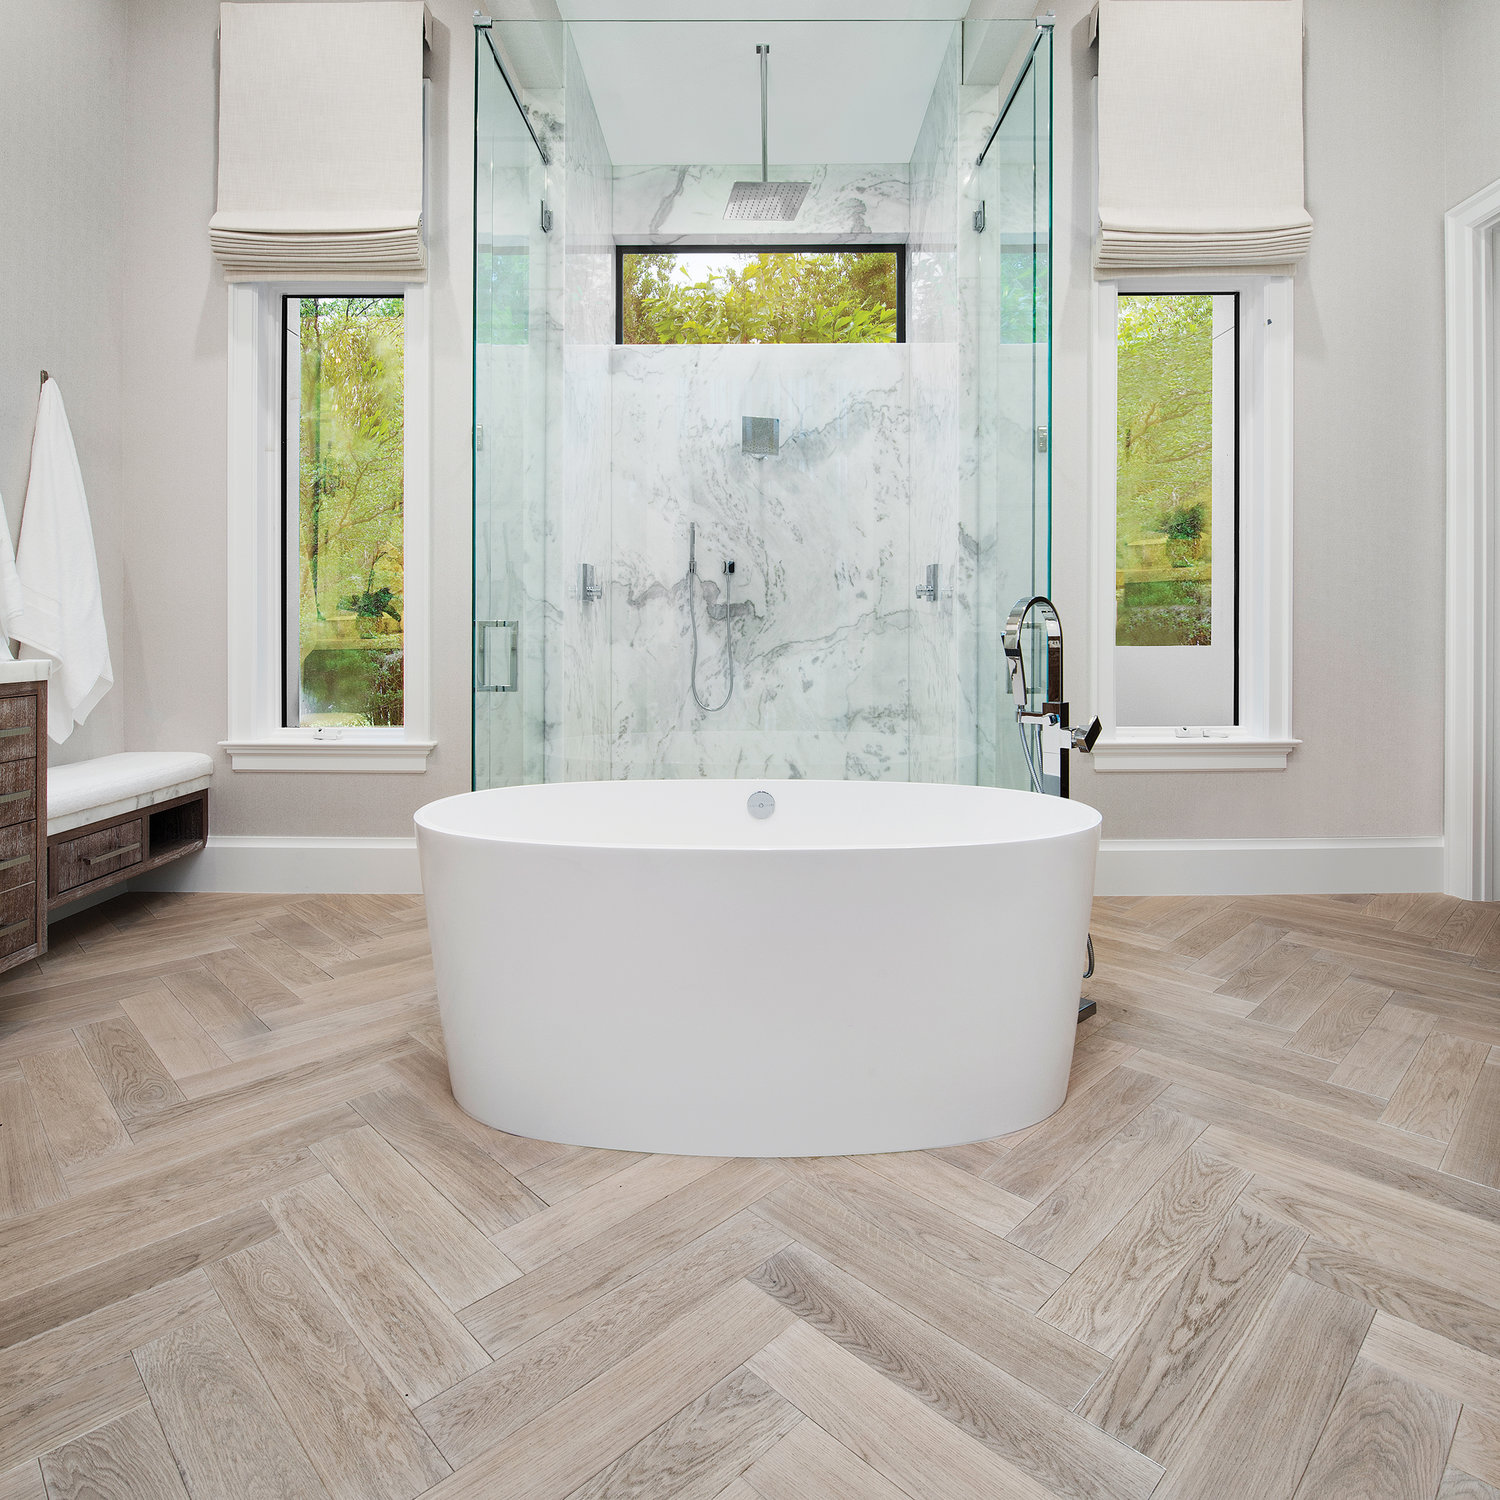 Here, herringbone has been used to create a solid and artistic foundation for this spa-like space. The different angles in this flooring pattern means the tones and colors will change slightly creating movement in the room.